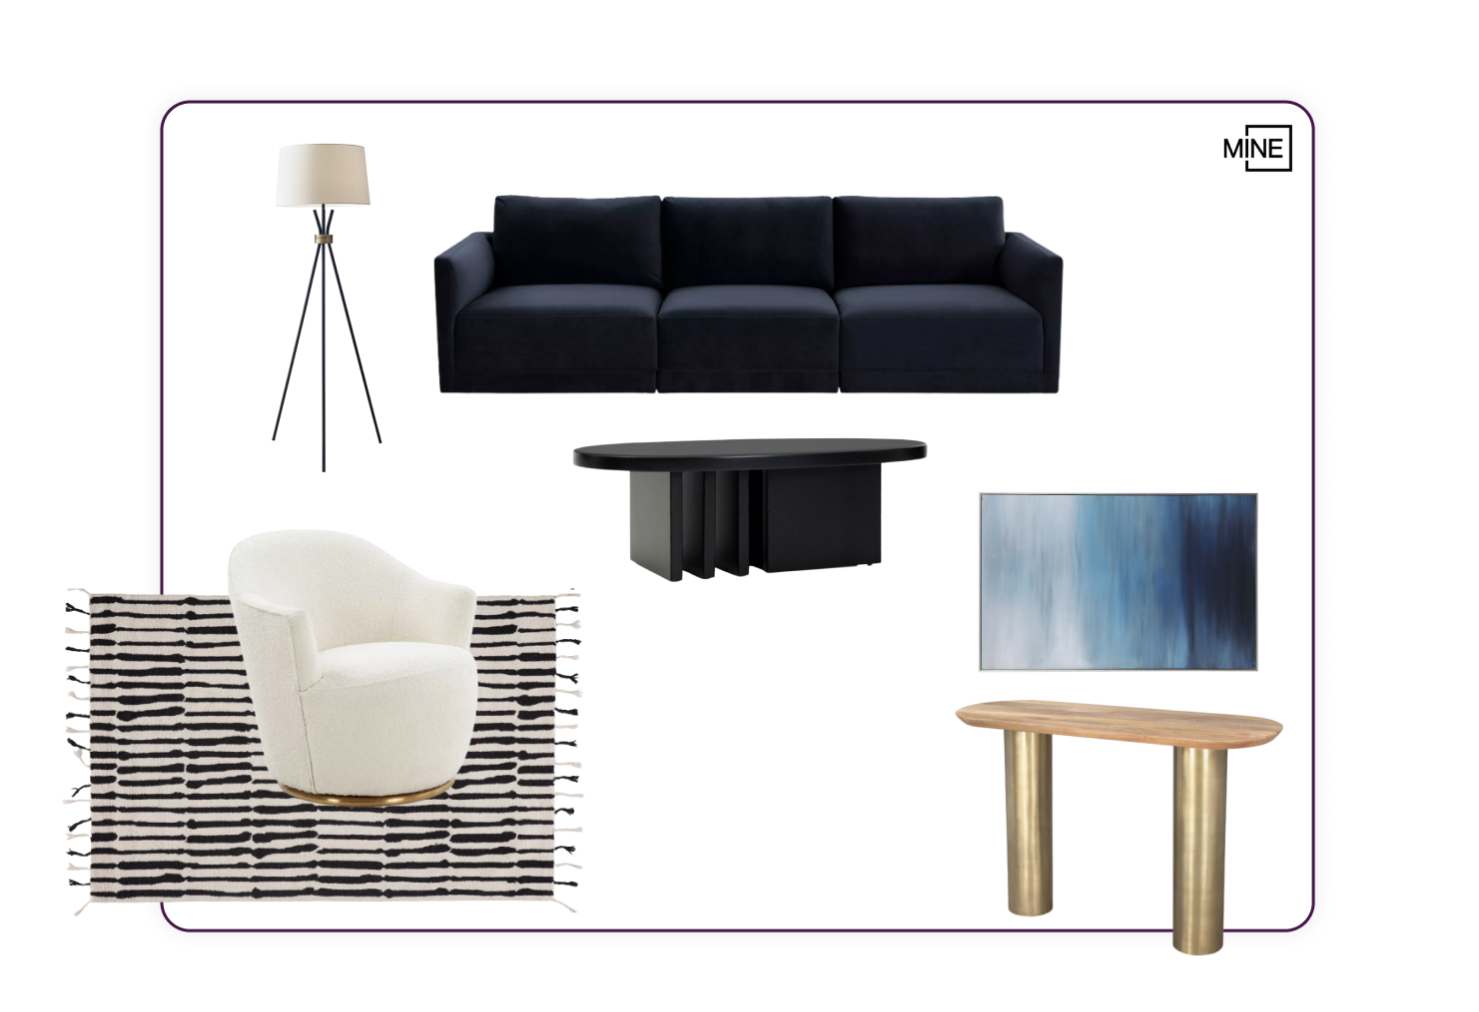 Collage of a living room set with a couch, standing lamp, coffee table, rug, chair, stand, and wall art